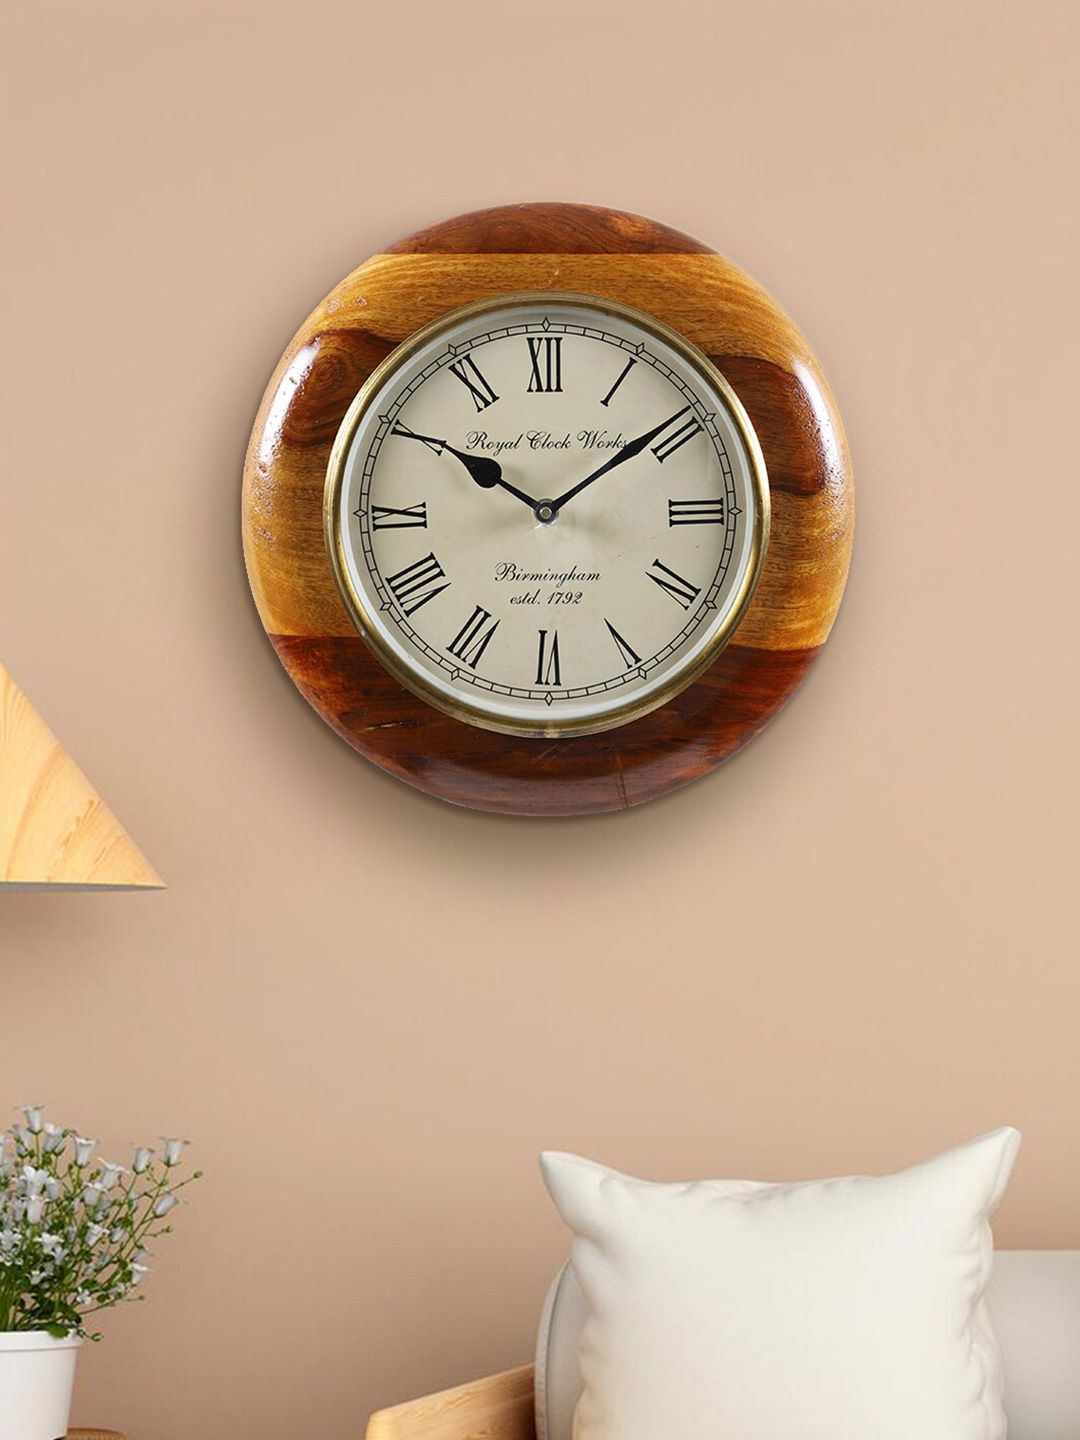 Aapno Rajasthan Brown Textured Contemporary Wall Clock Price in India